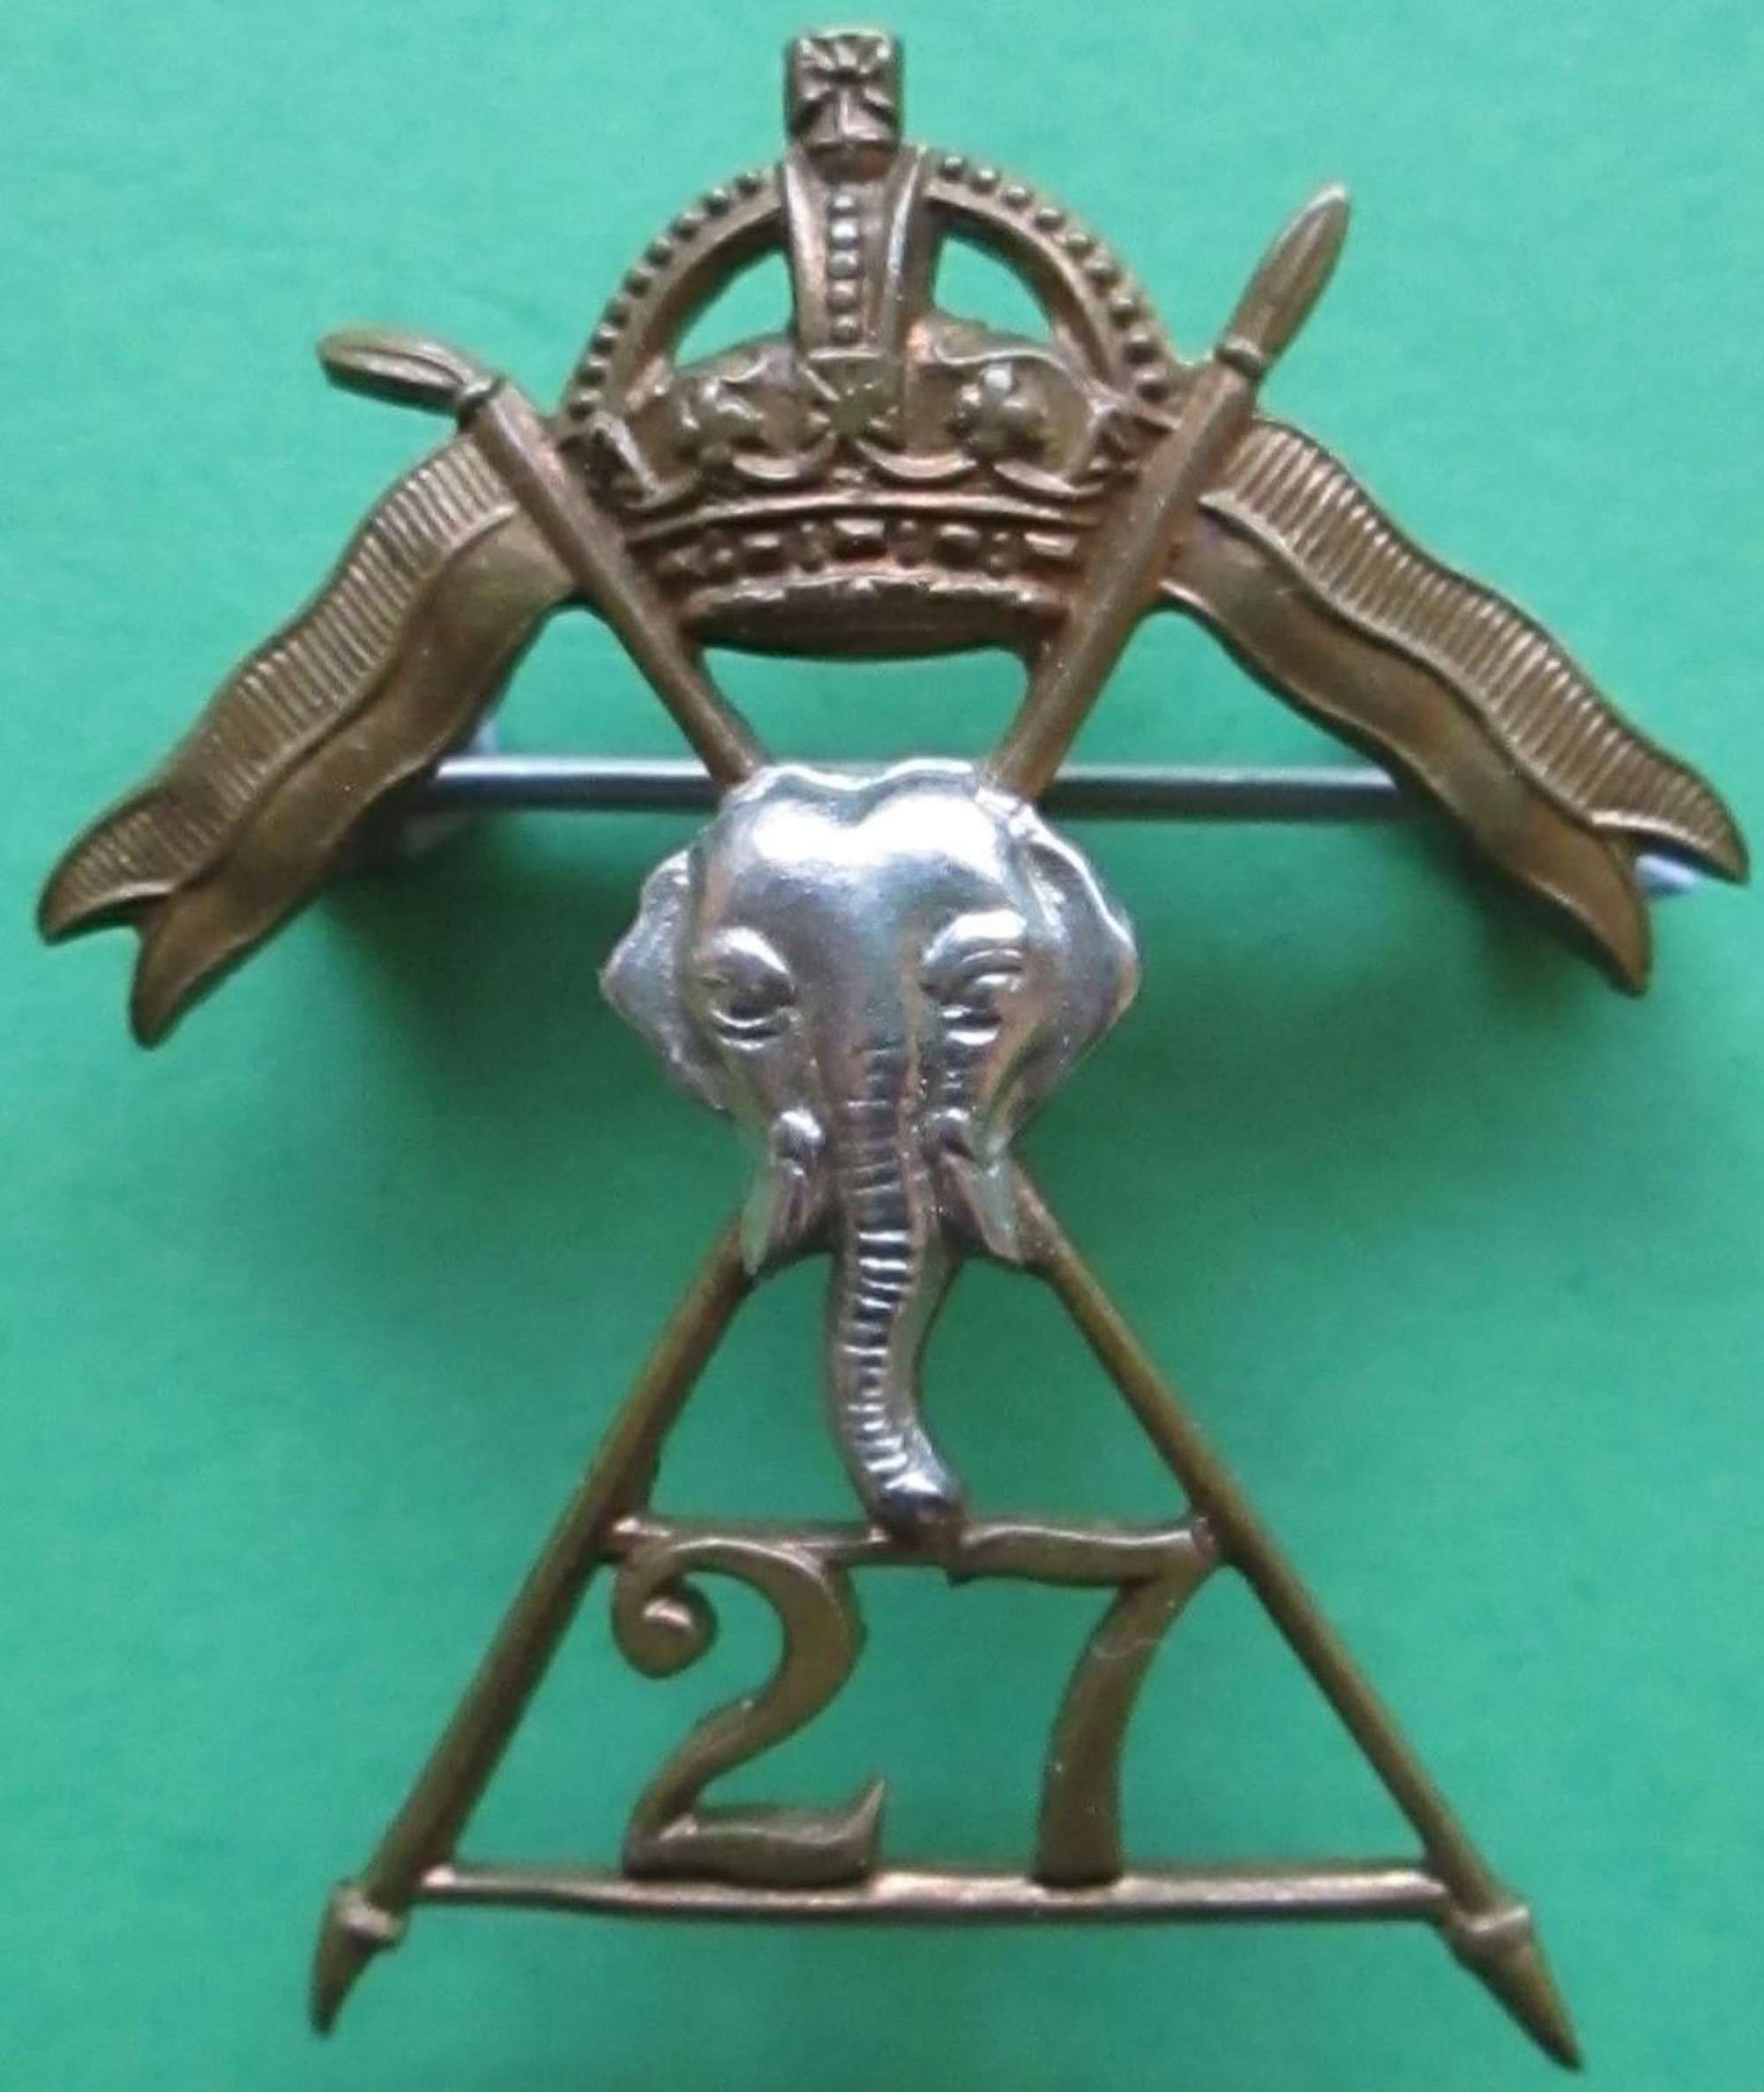 A 27th LANCERS CAP BADGE WHICH HAS BEEN BROOCHED